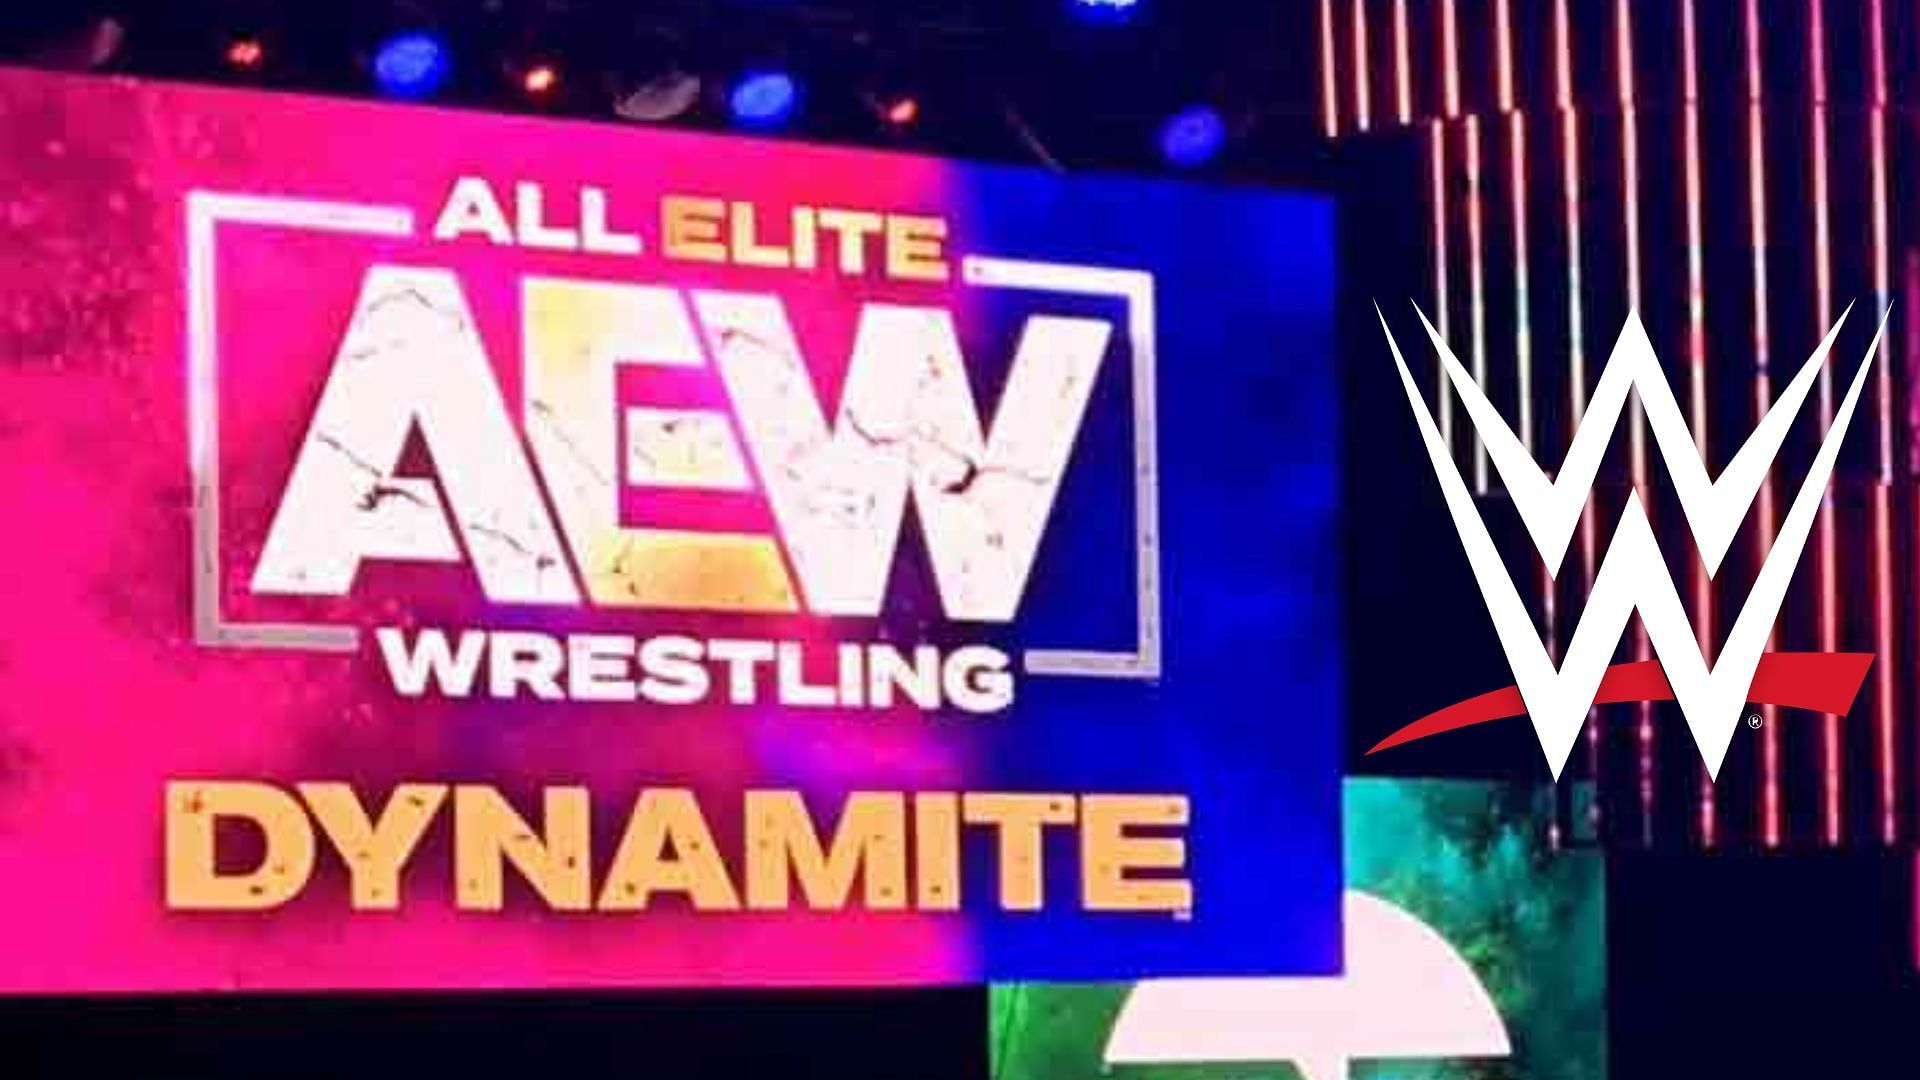 Which former AEW star would consider a move back to WWE?